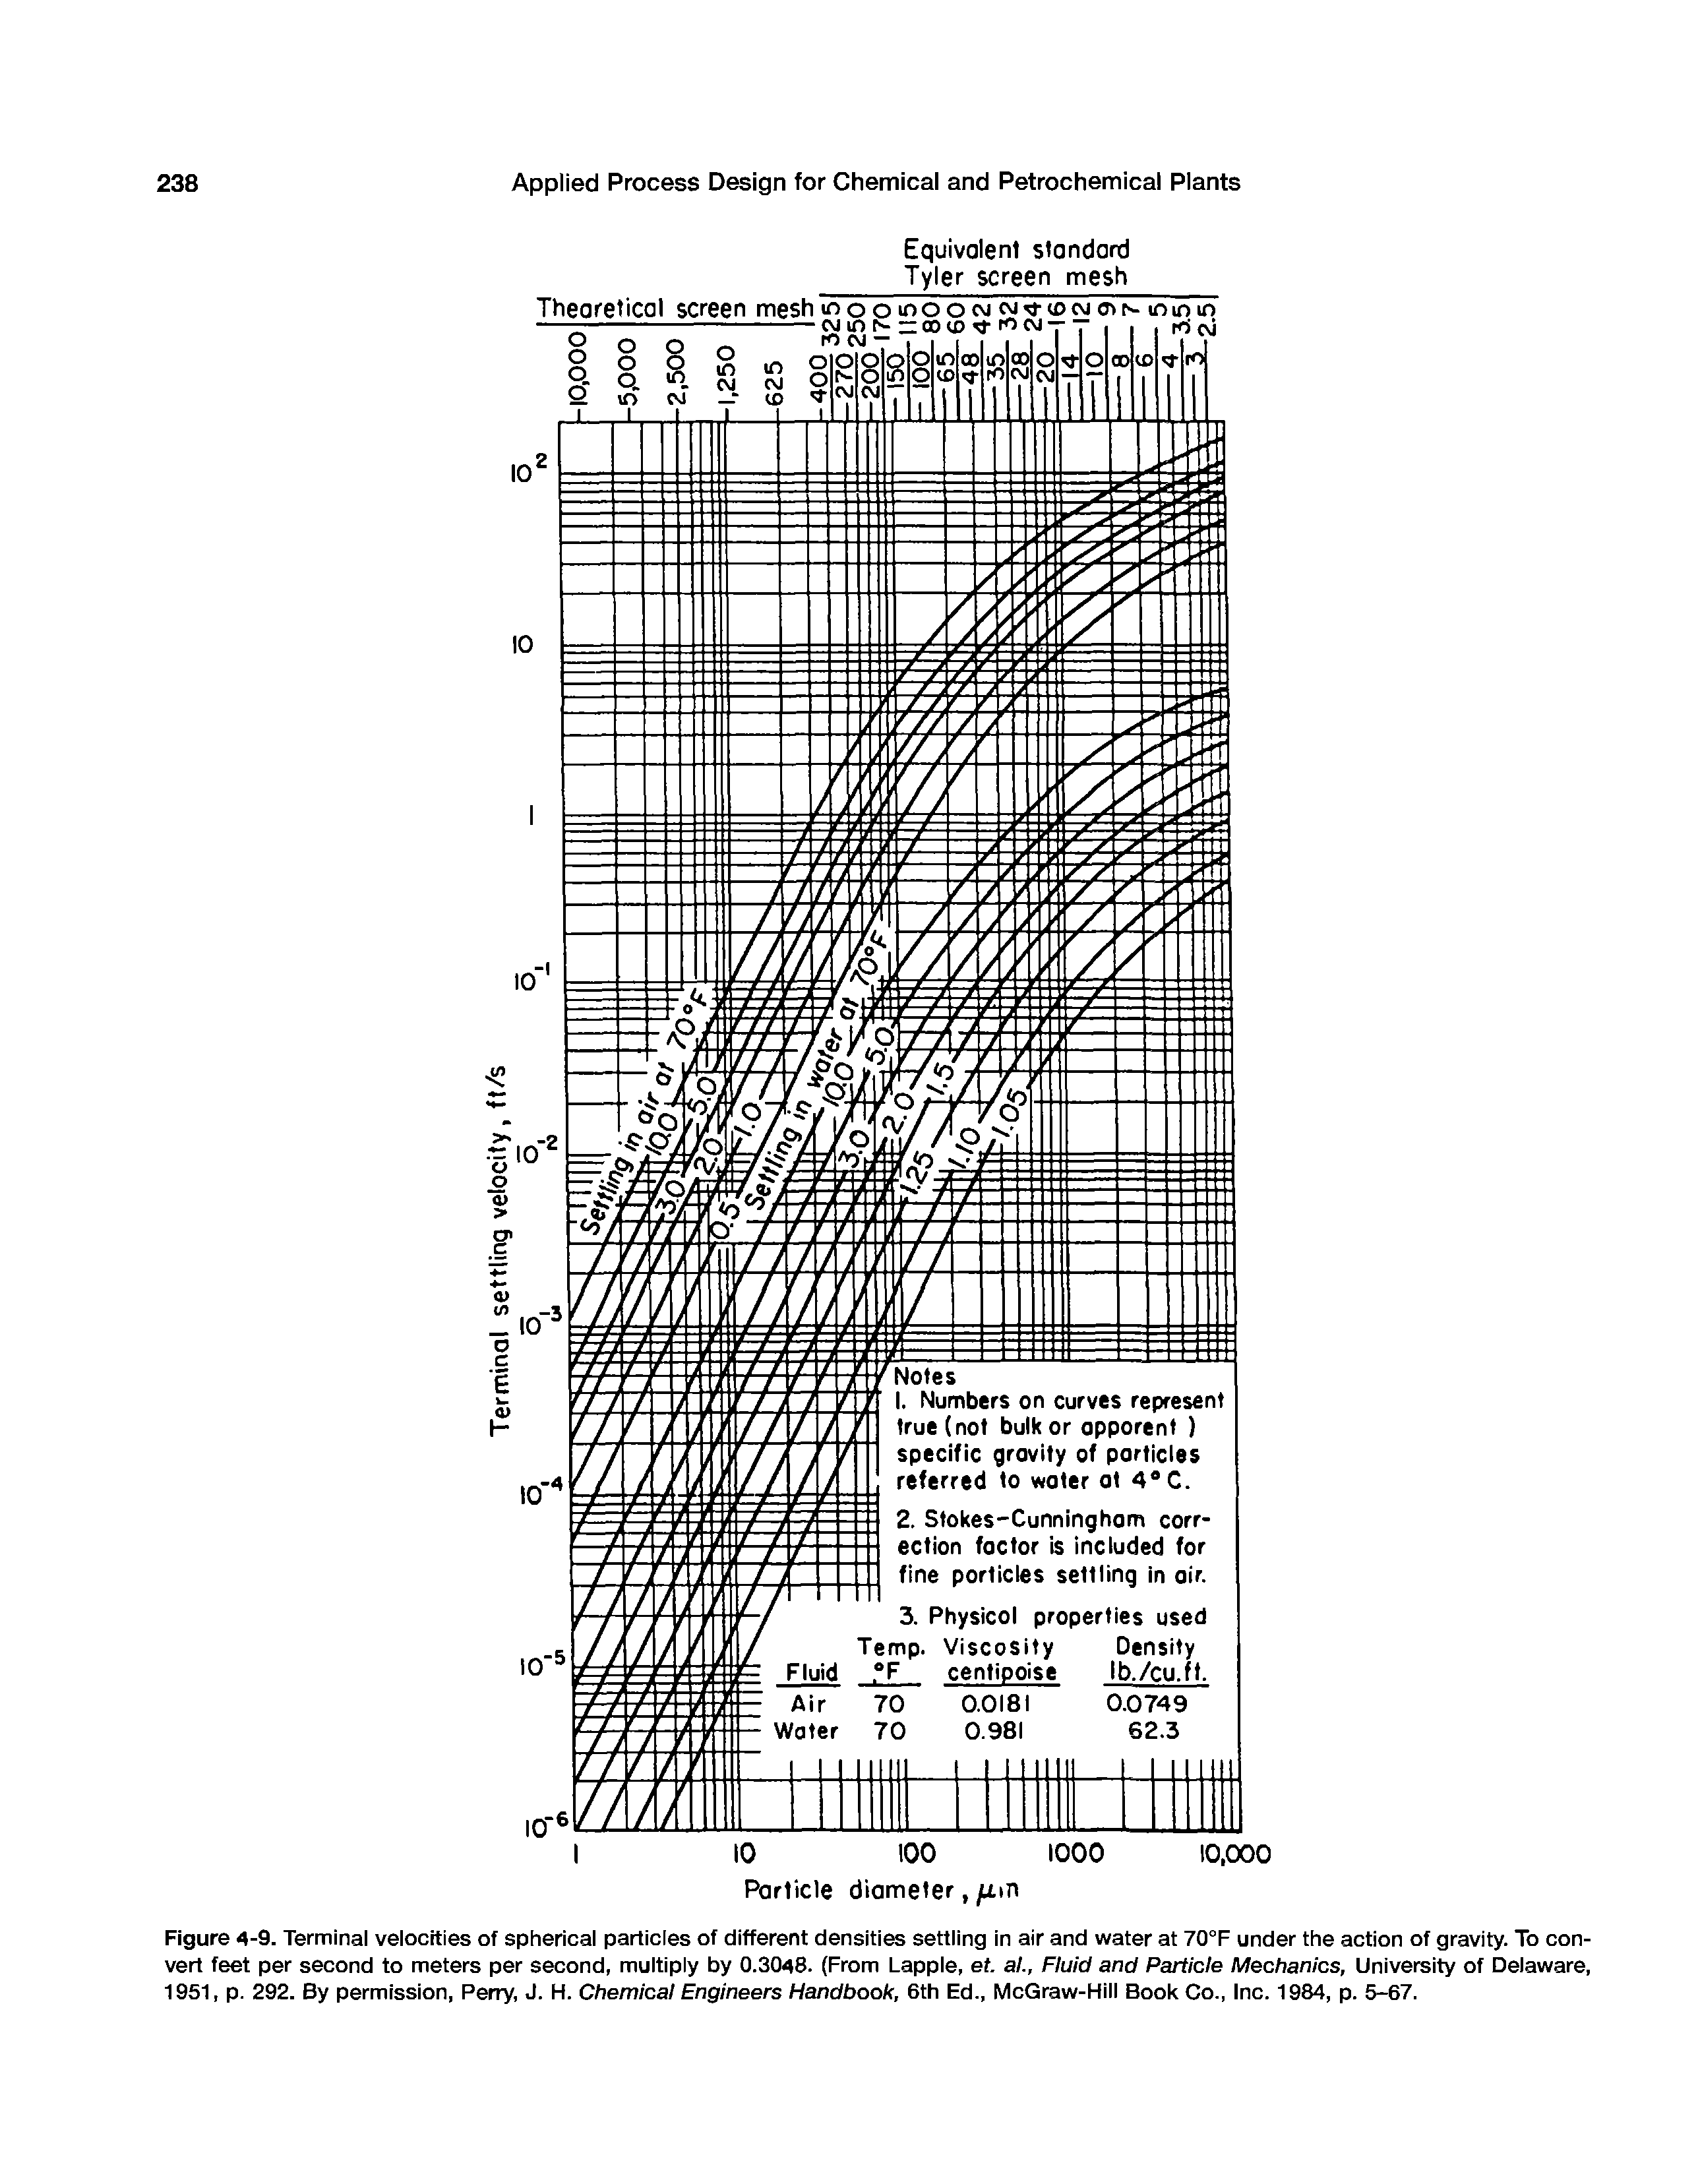 Figure 4-9. Terminal velocities of spherical particles of different densities settling in air and water at 70°F under the action of gravity. To convert feet per second to meters per second, multiply by 0.3048. (From Lapple, ef. a/.. Fluid and Particle Mechanics, University of Delaware, 1951, p. 292. By permission. Perry, J. H. Chemical Engineers Handbook, 6th Ed., McGraw-Hill Book Co., Inc. 1984, p. 5-67.